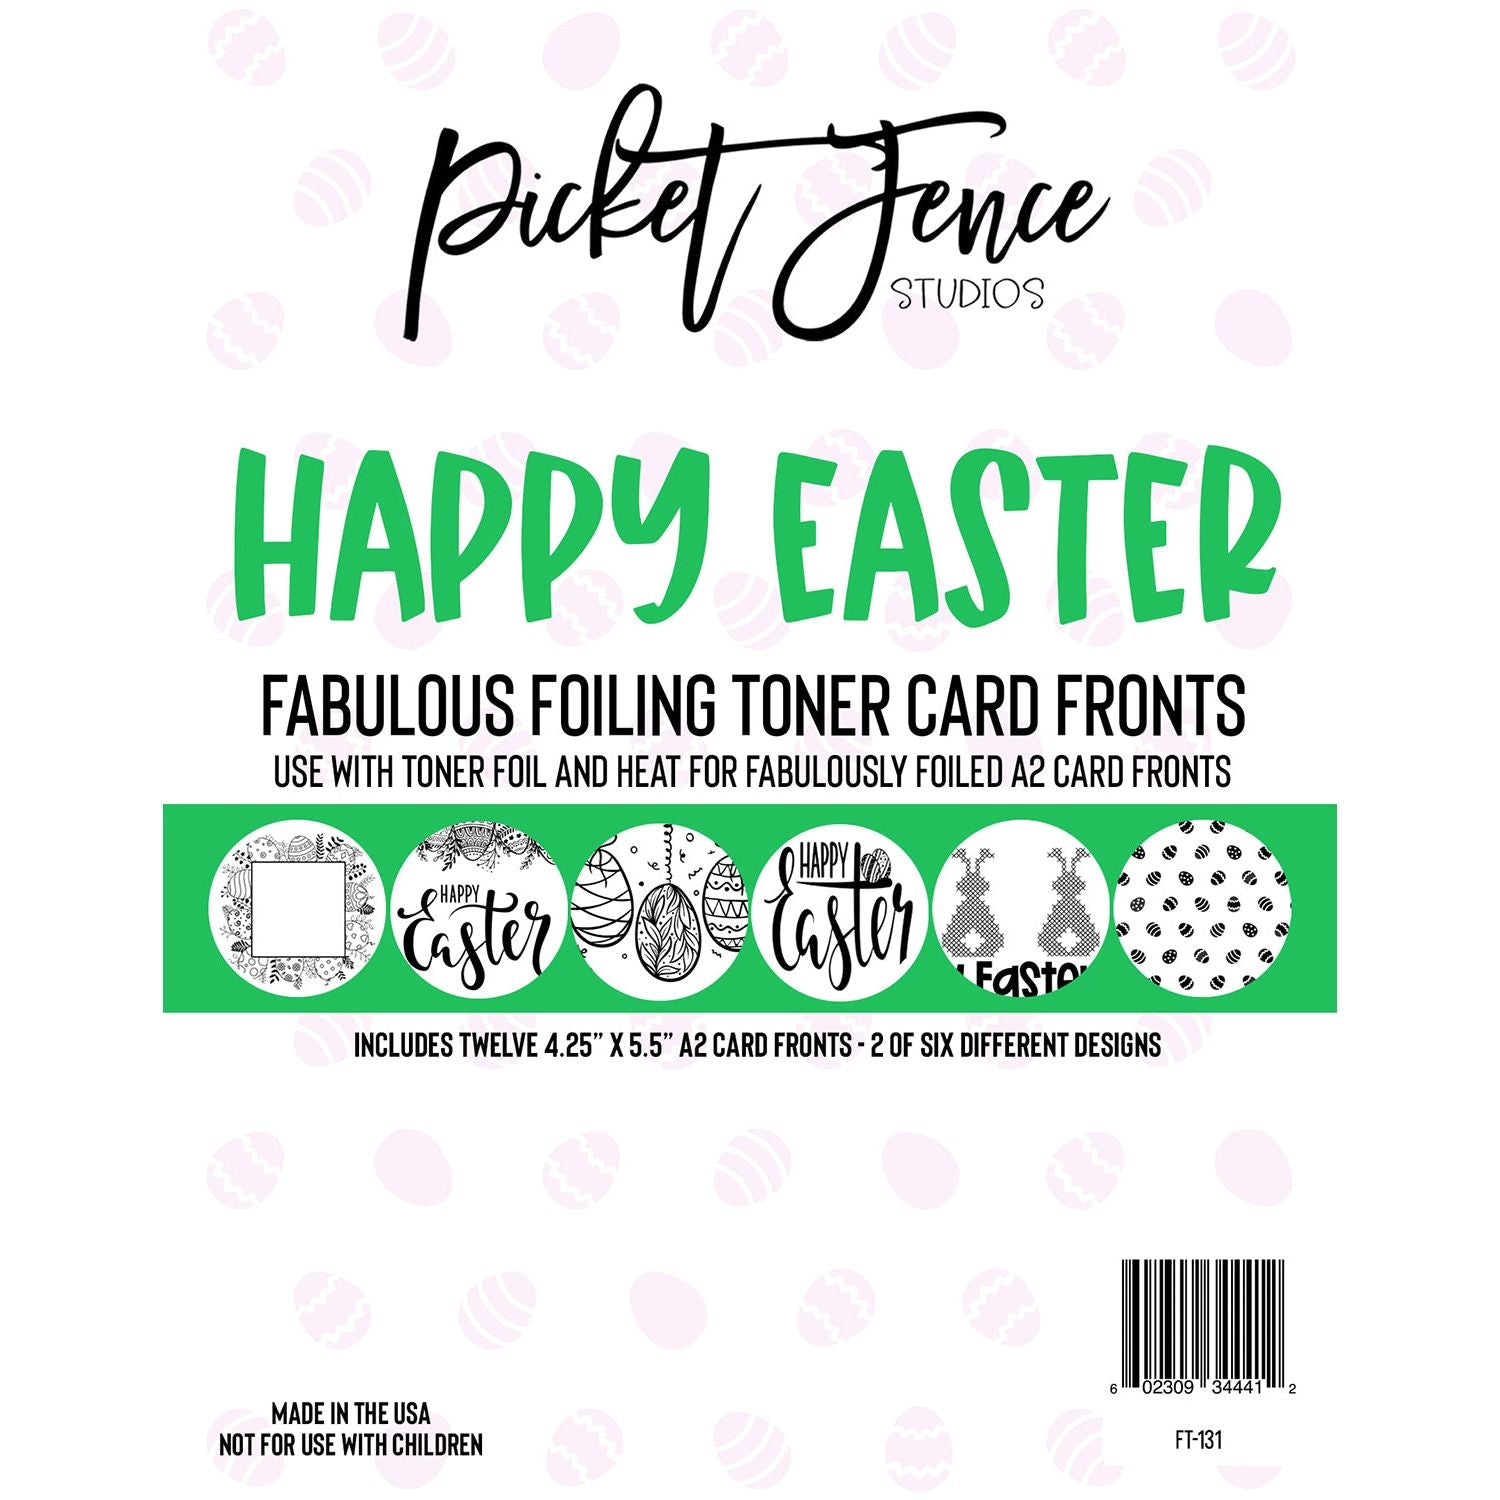 Fabulous Foiling Toner Card Fronts - Happy Easter